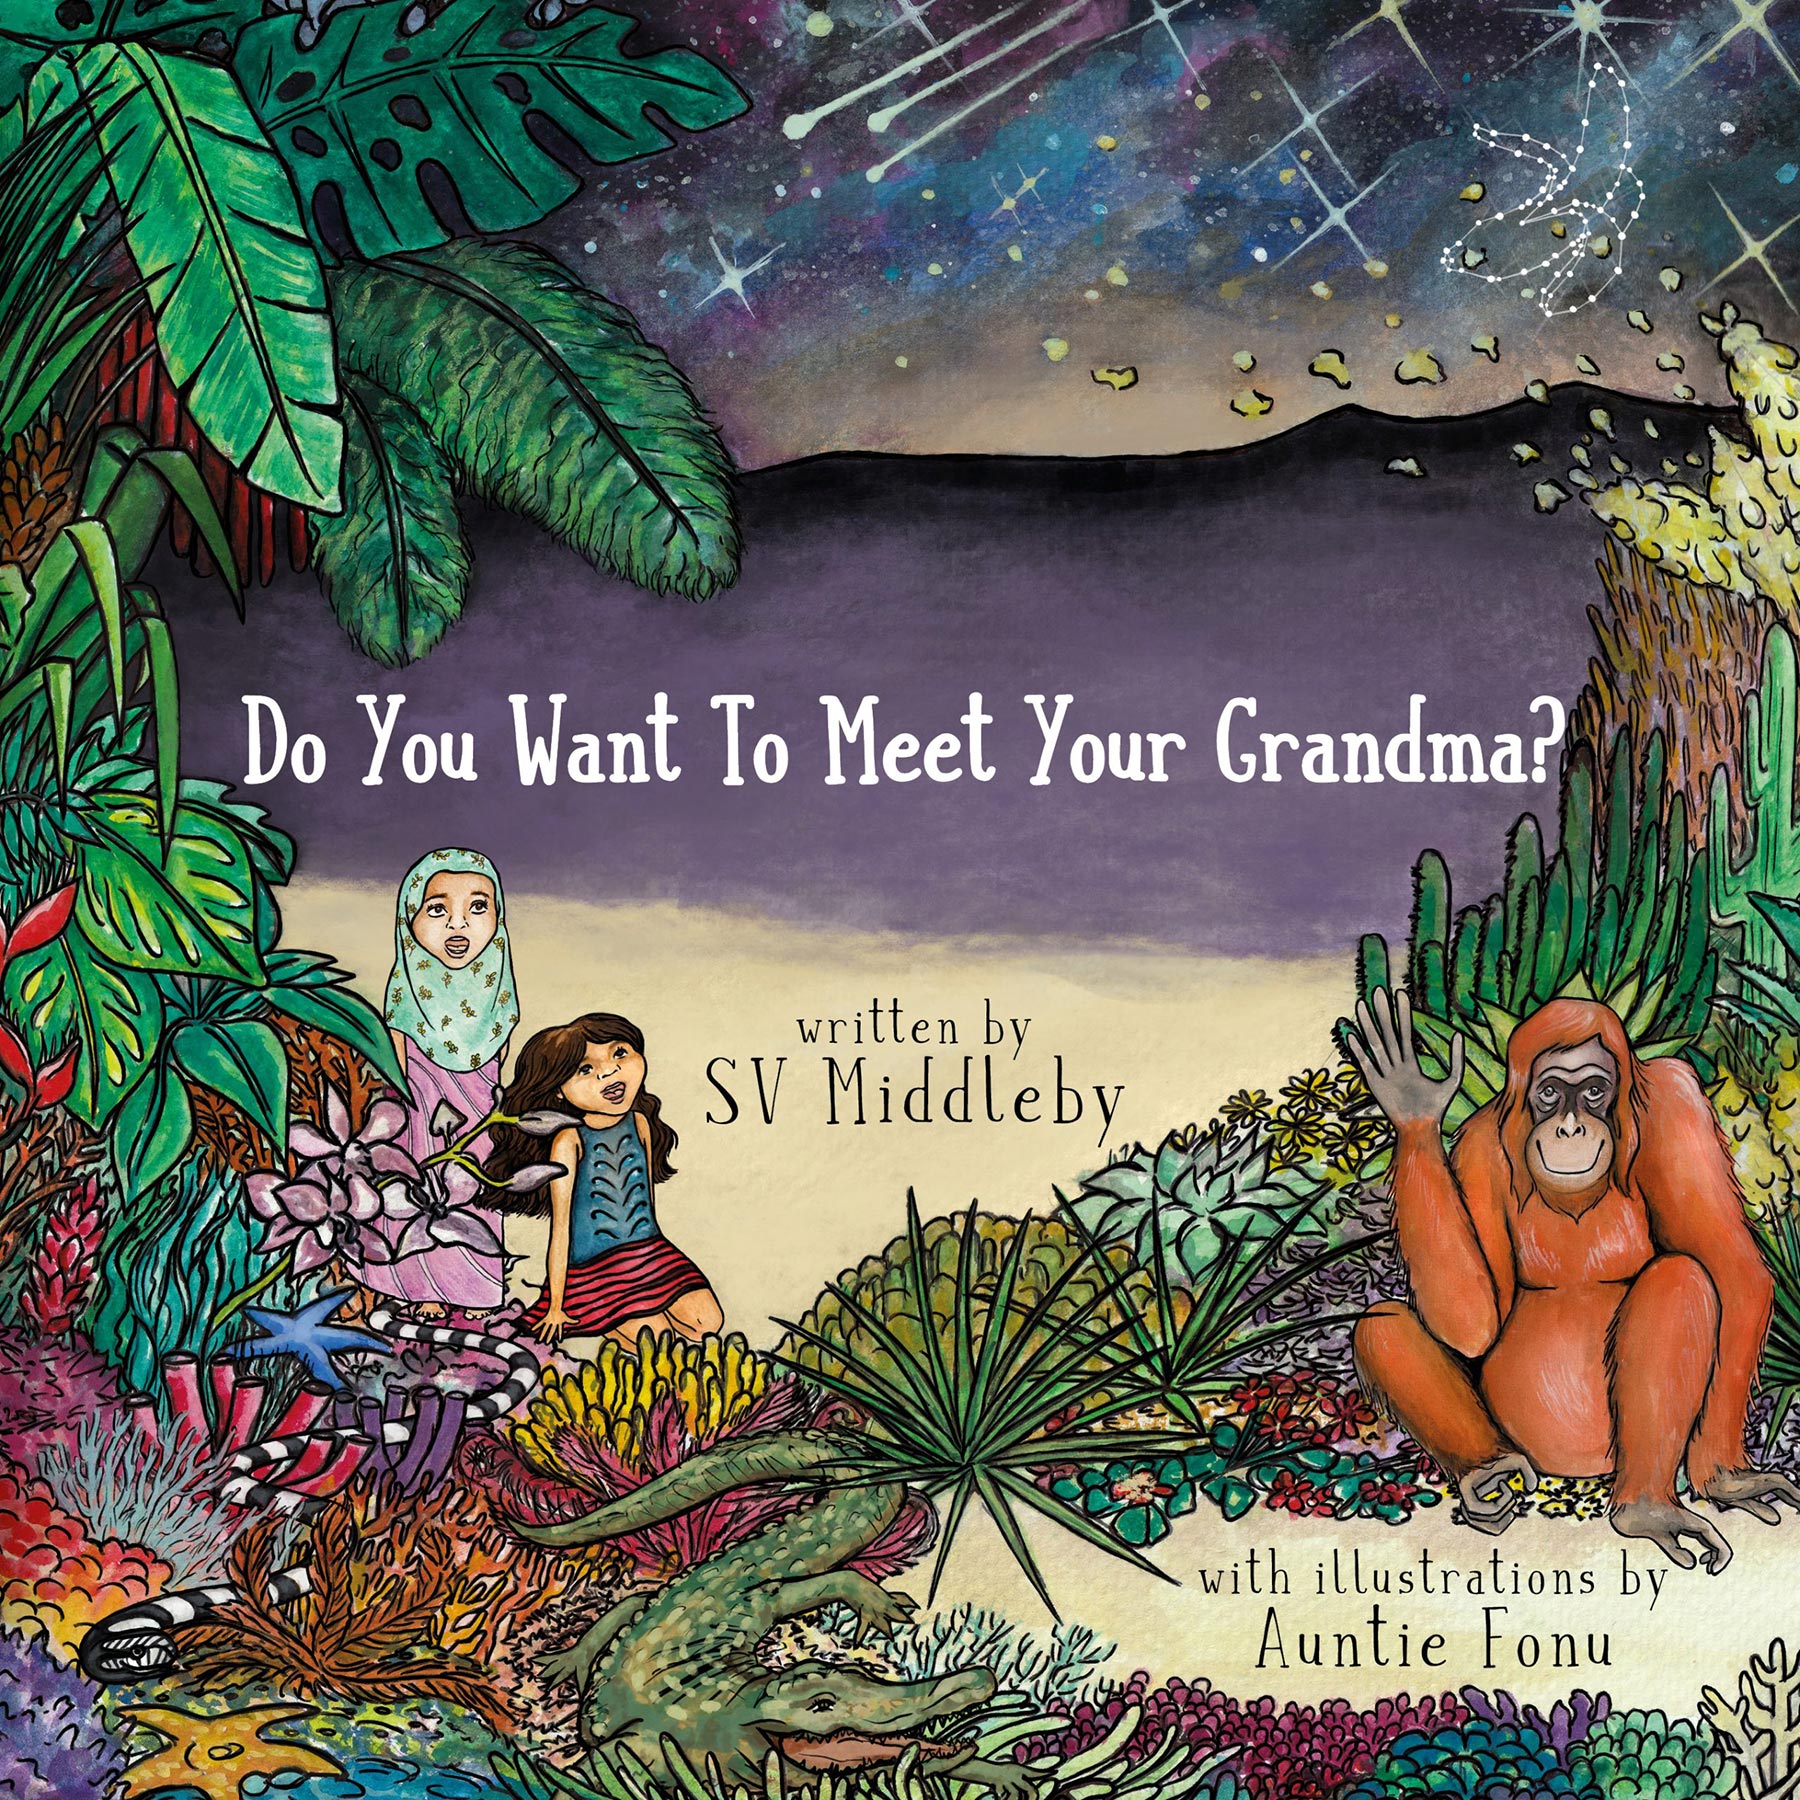 The cover of the book Do you want to meet your Grandma?